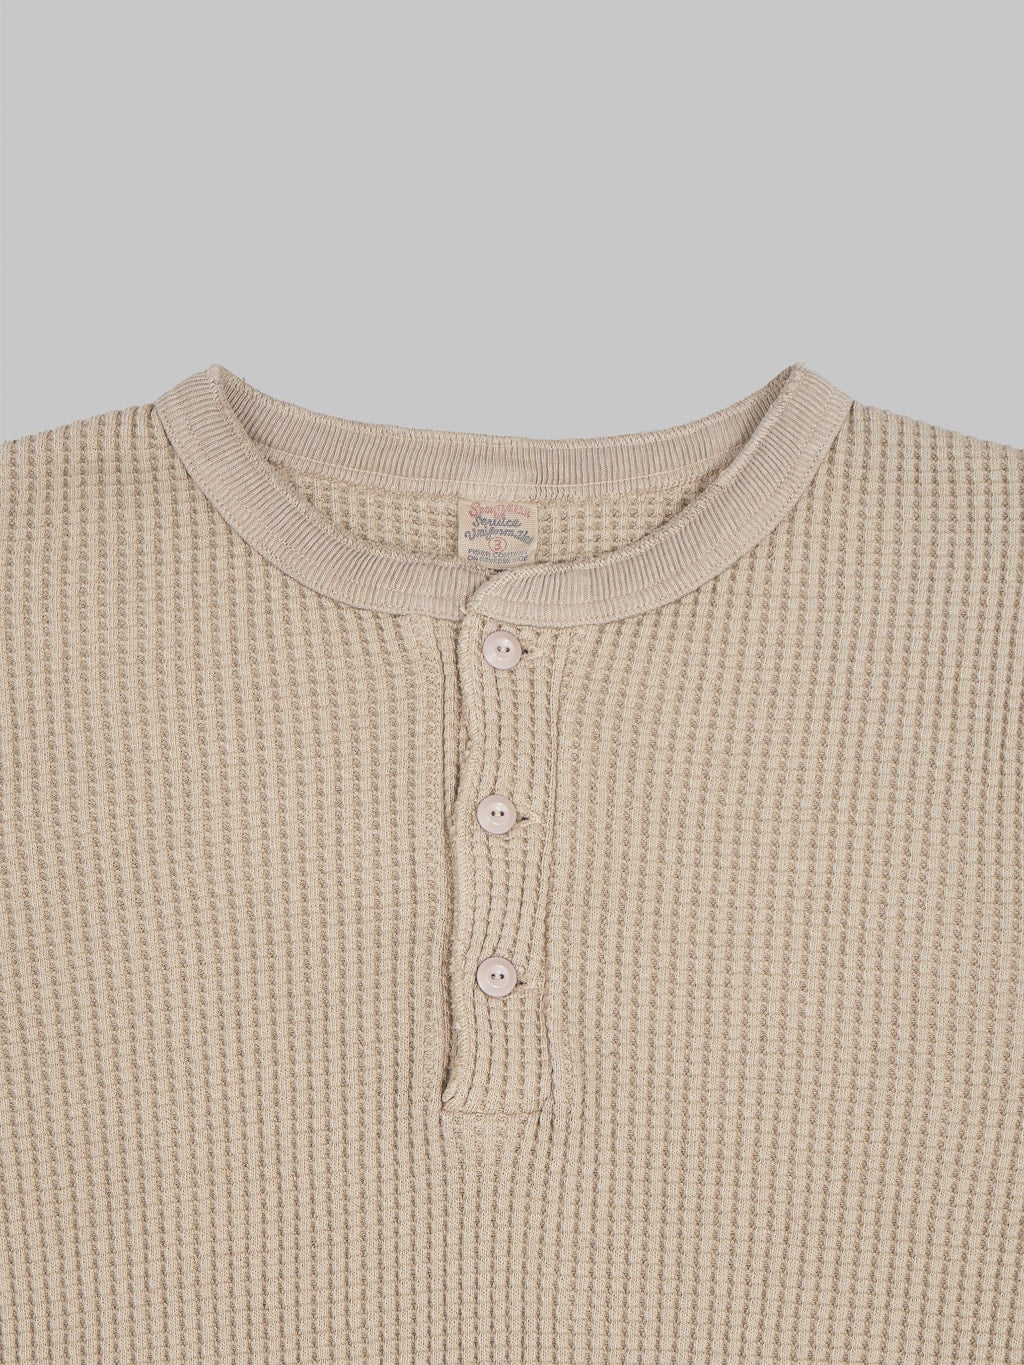 UES Thermal Big Waffle Henley TShirt Beige  chest details